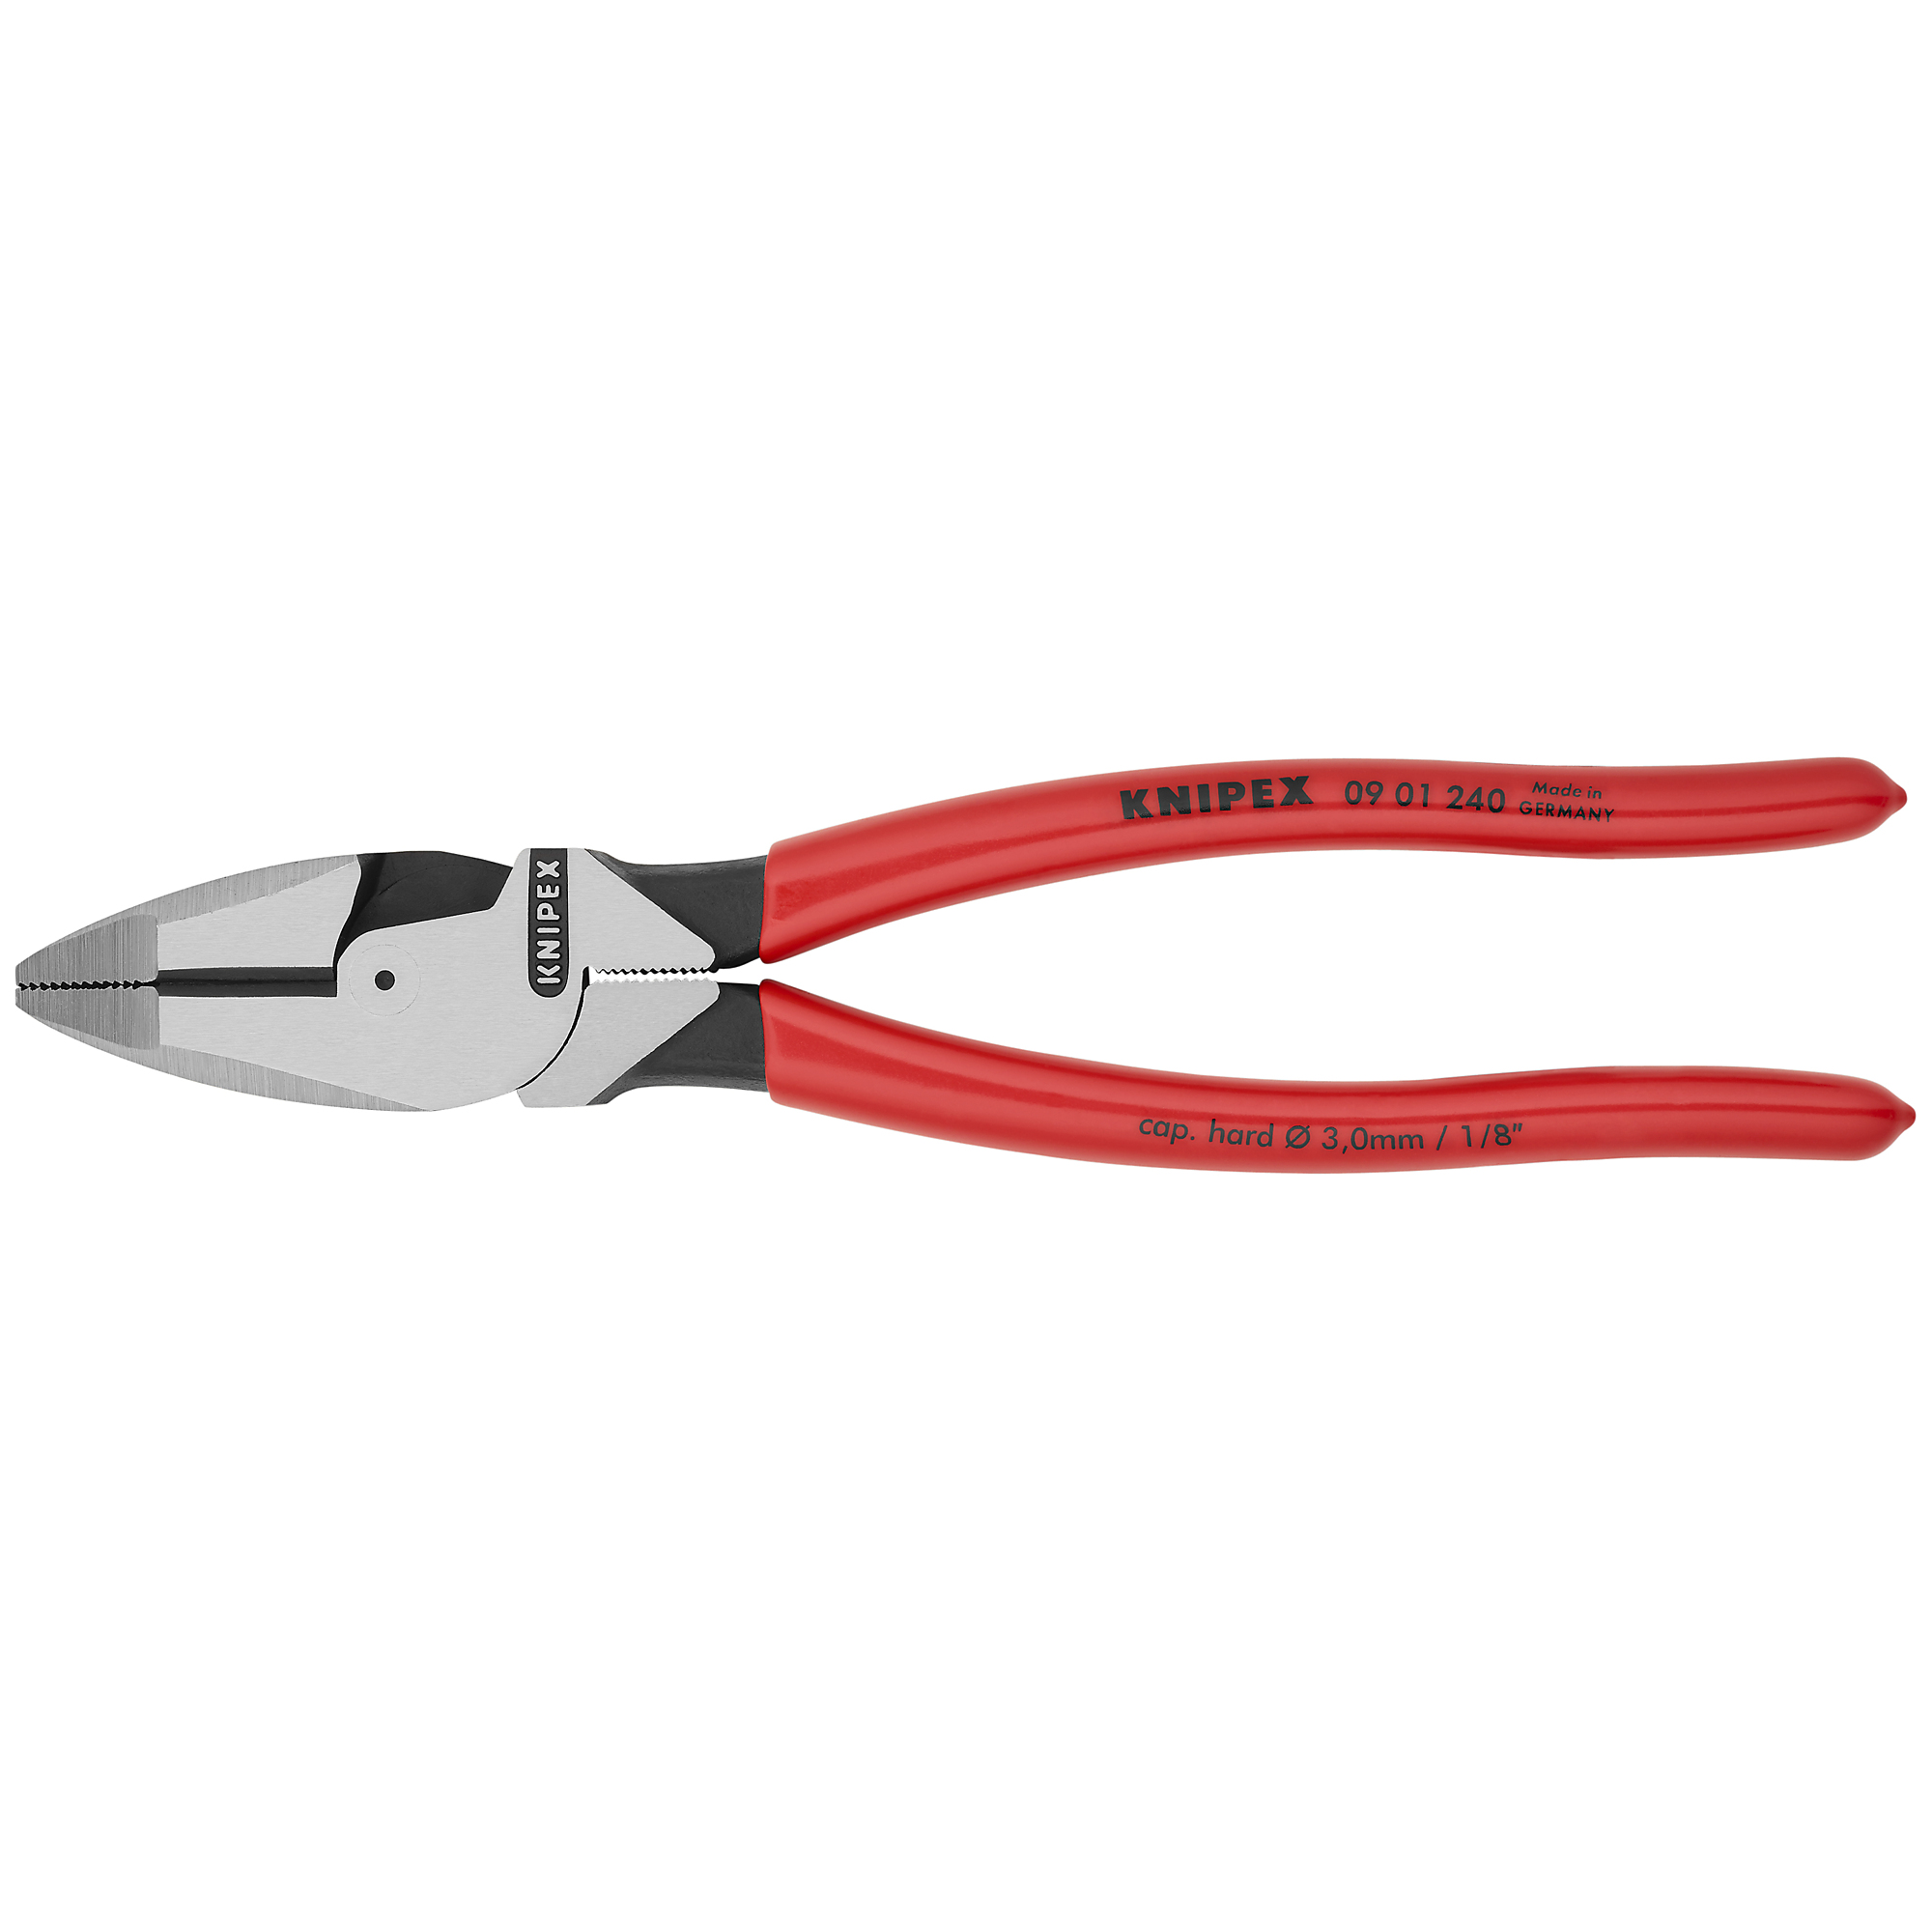 KNIPEX, HL Lineman's Pliers New England Head, 9.5Inch, Pieces (qty.) 1 Material Steel, Jaw Capacity 0.188 in, Model 09 01 240 SBA